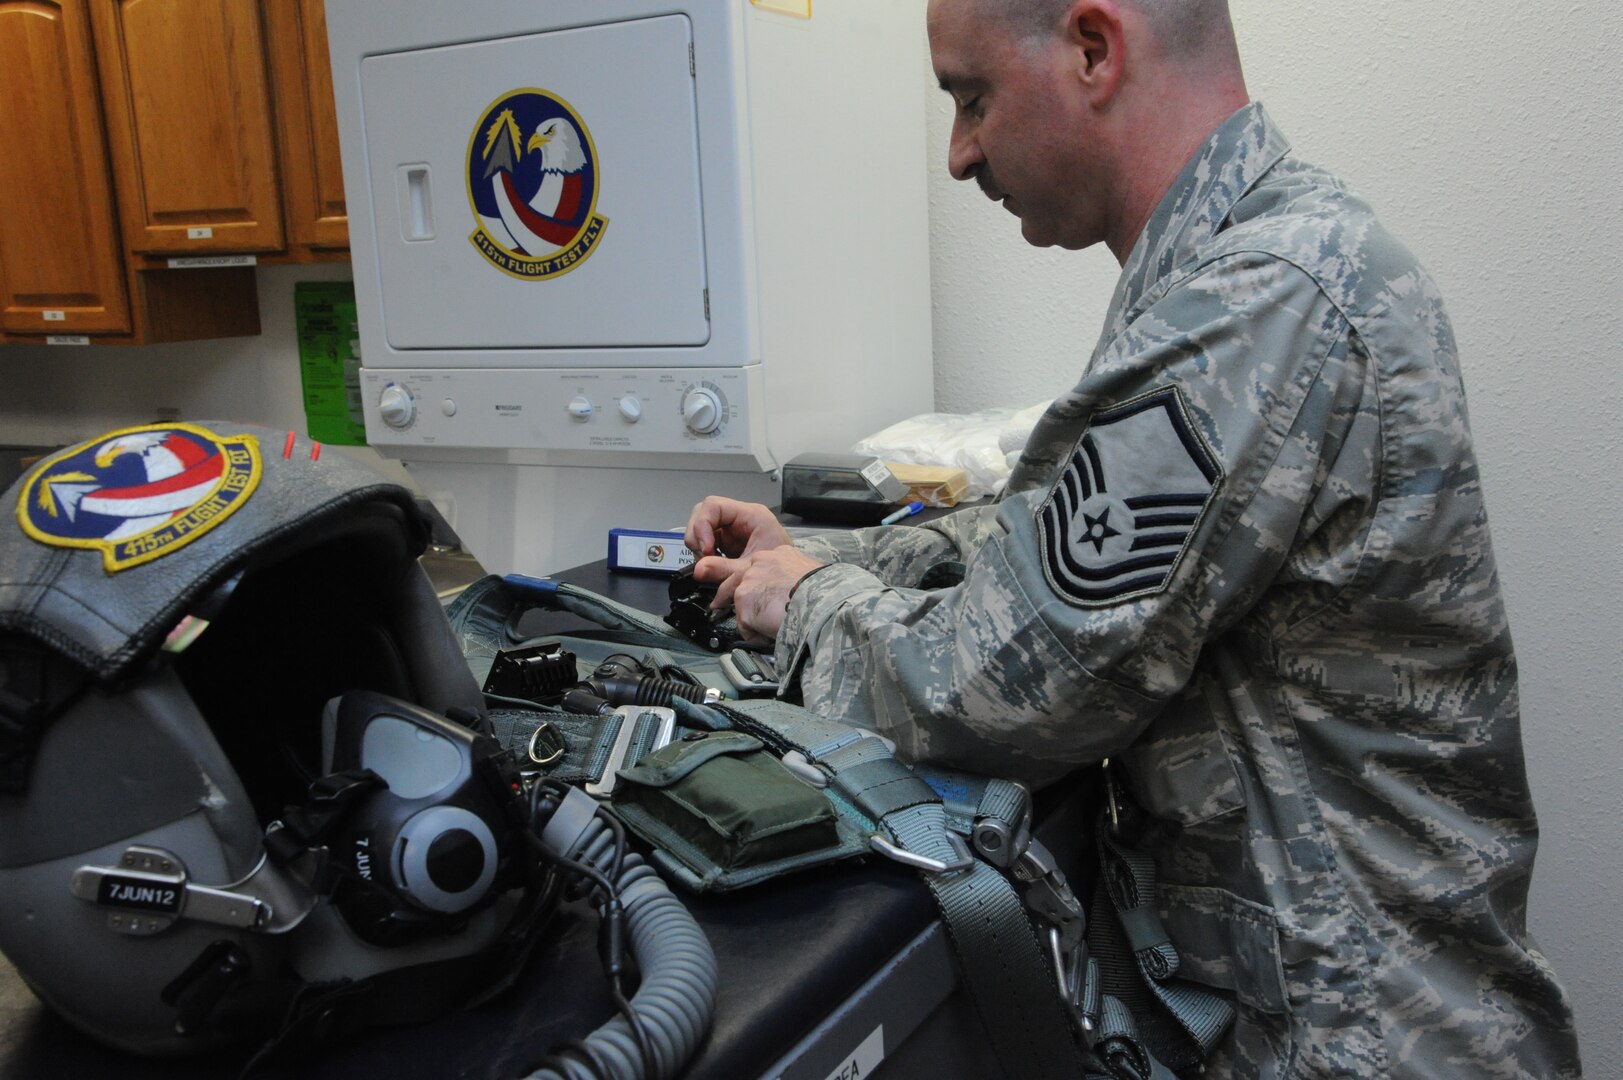 Master Sgt Jason Fisch, 415th Flight Test Flight aircrew flight equipment technician, inspects and repairs harnesses used by 415th FLTF pilots May 17 at Joint Base San Antonio-Randolph, Texas.  (U.S. Air Force photo by Rich McFadden) 